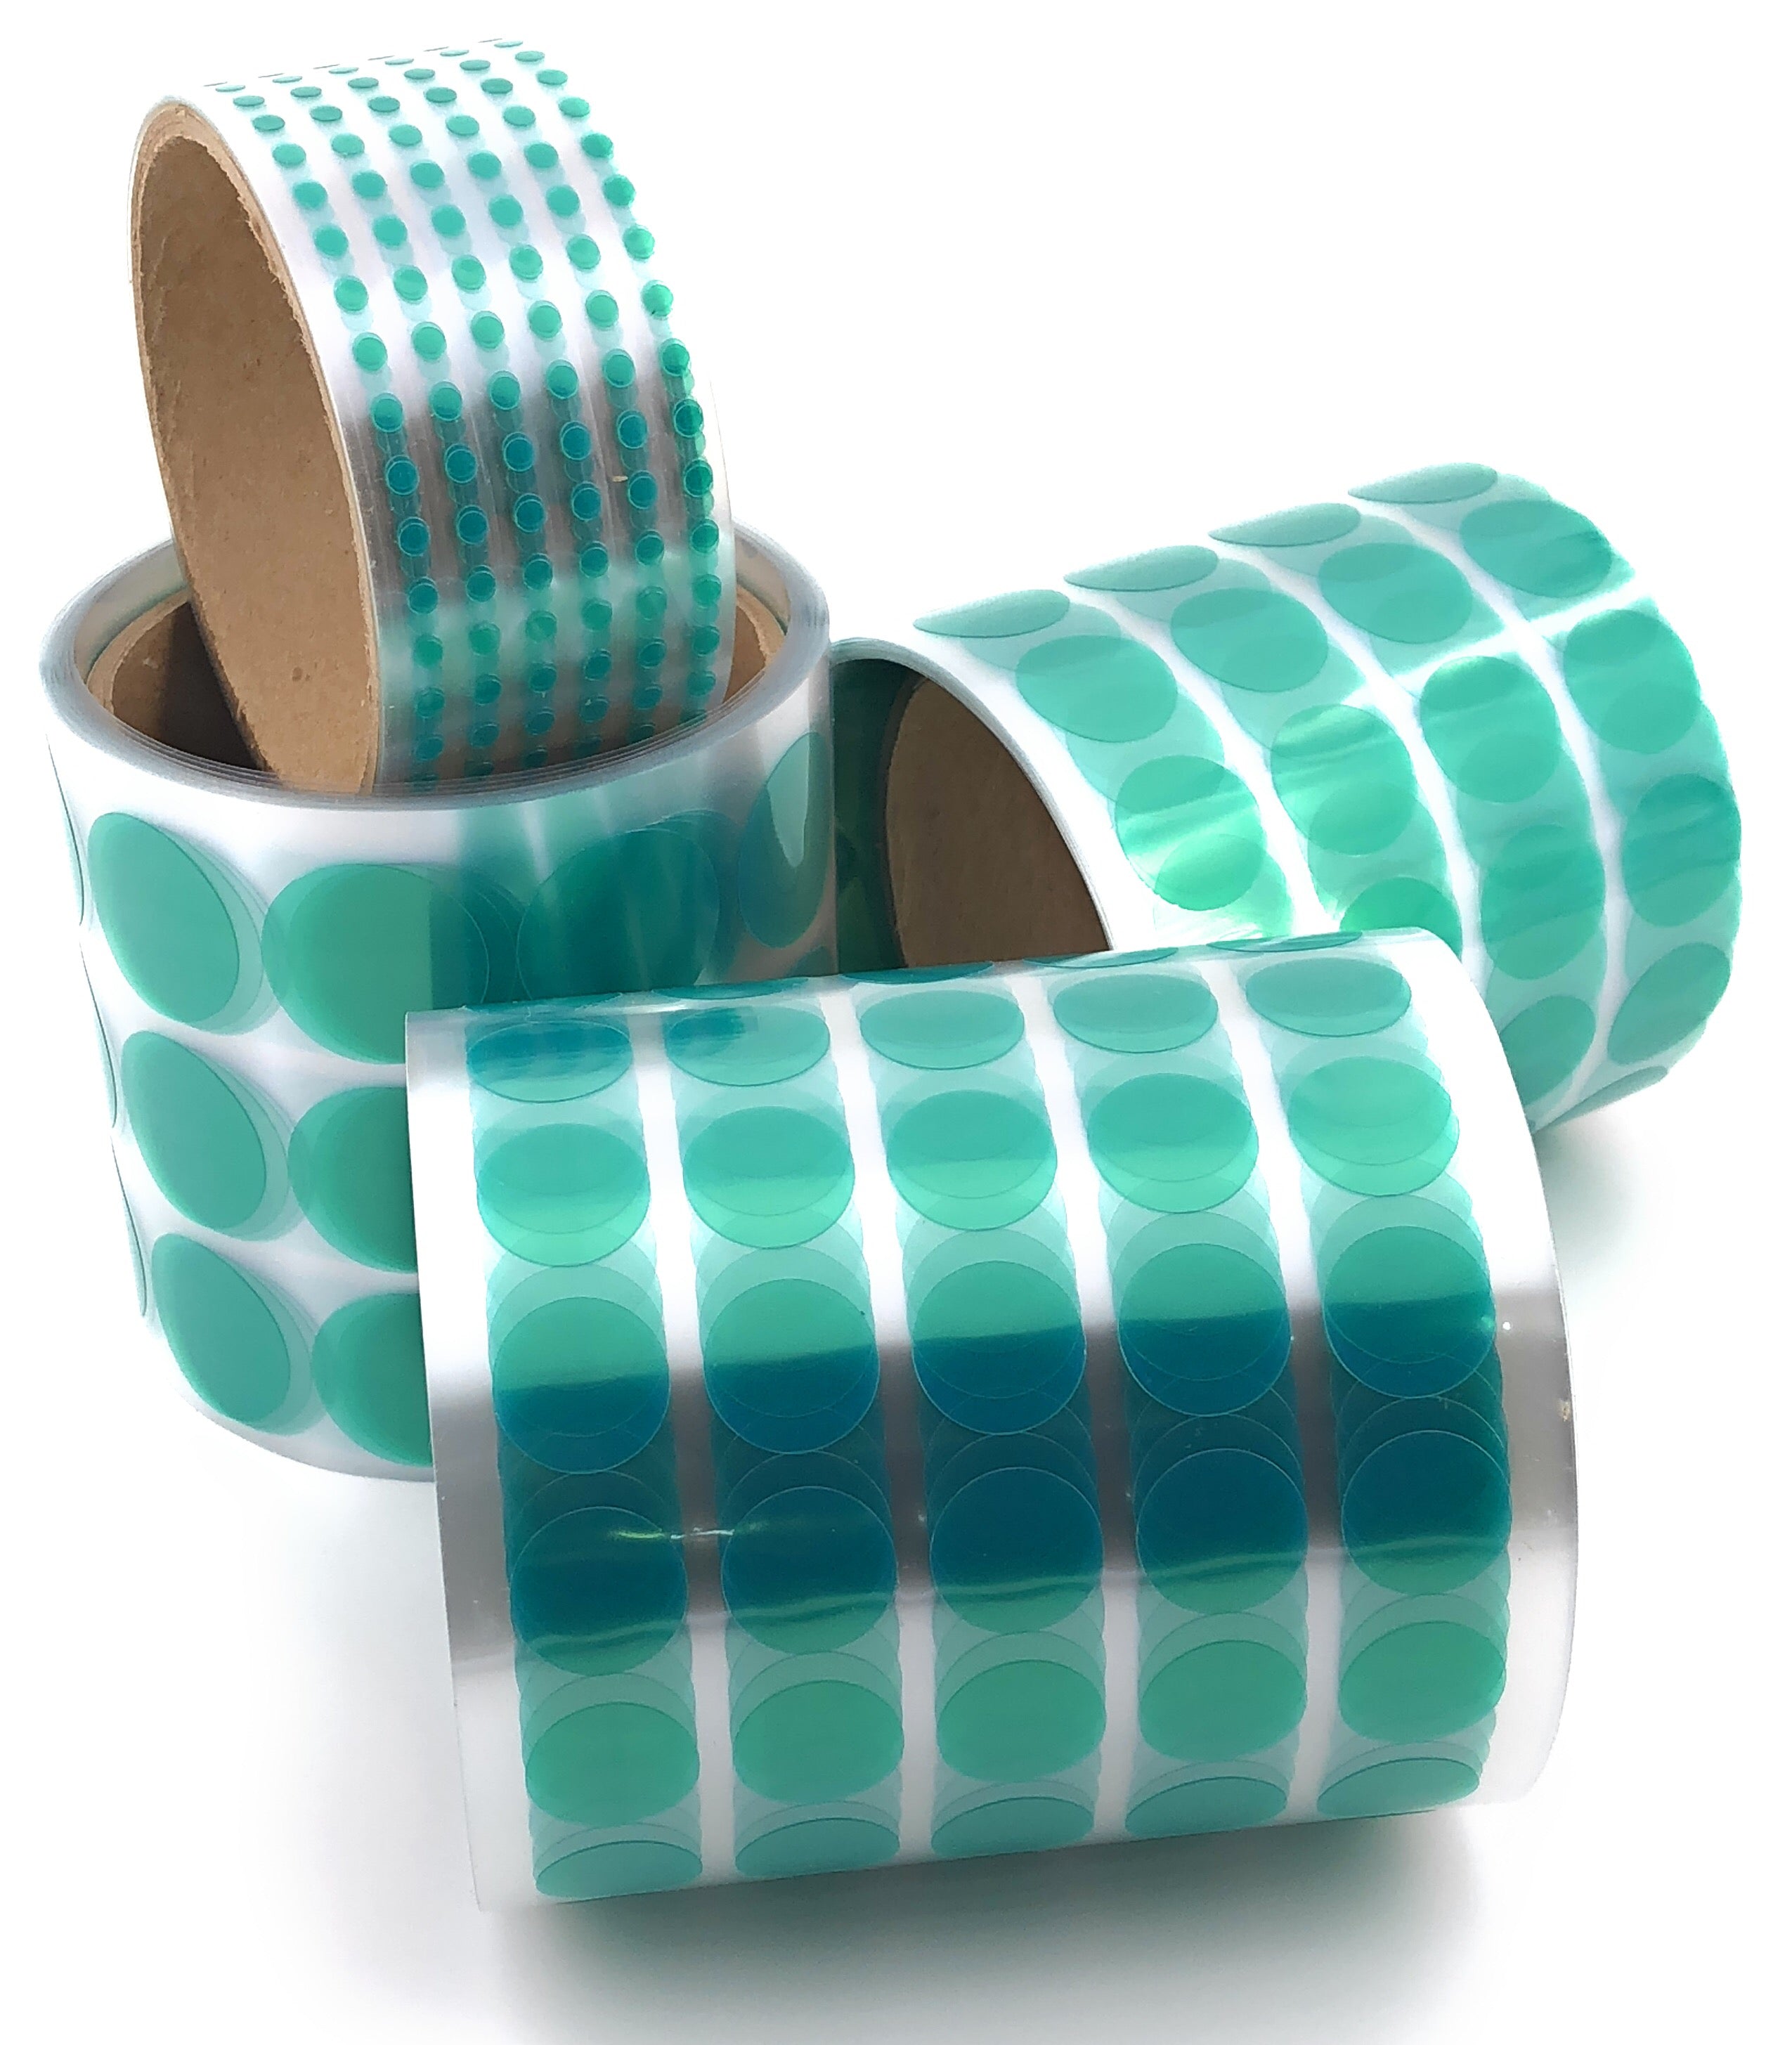 High Temperature and Pressure Rubber Masking Tapes and Discs for